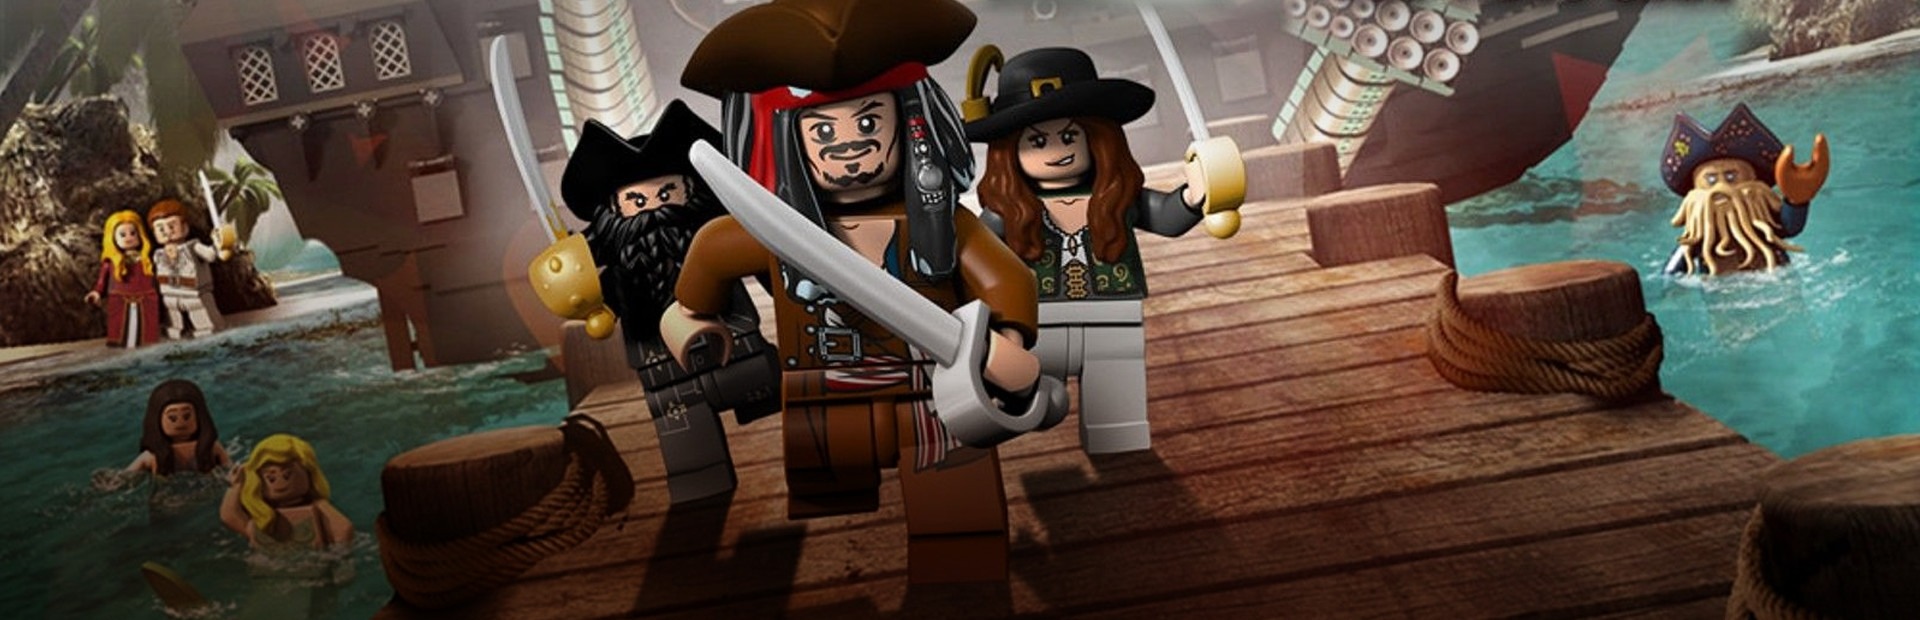 Banner Lego Pirates of the Caribbean